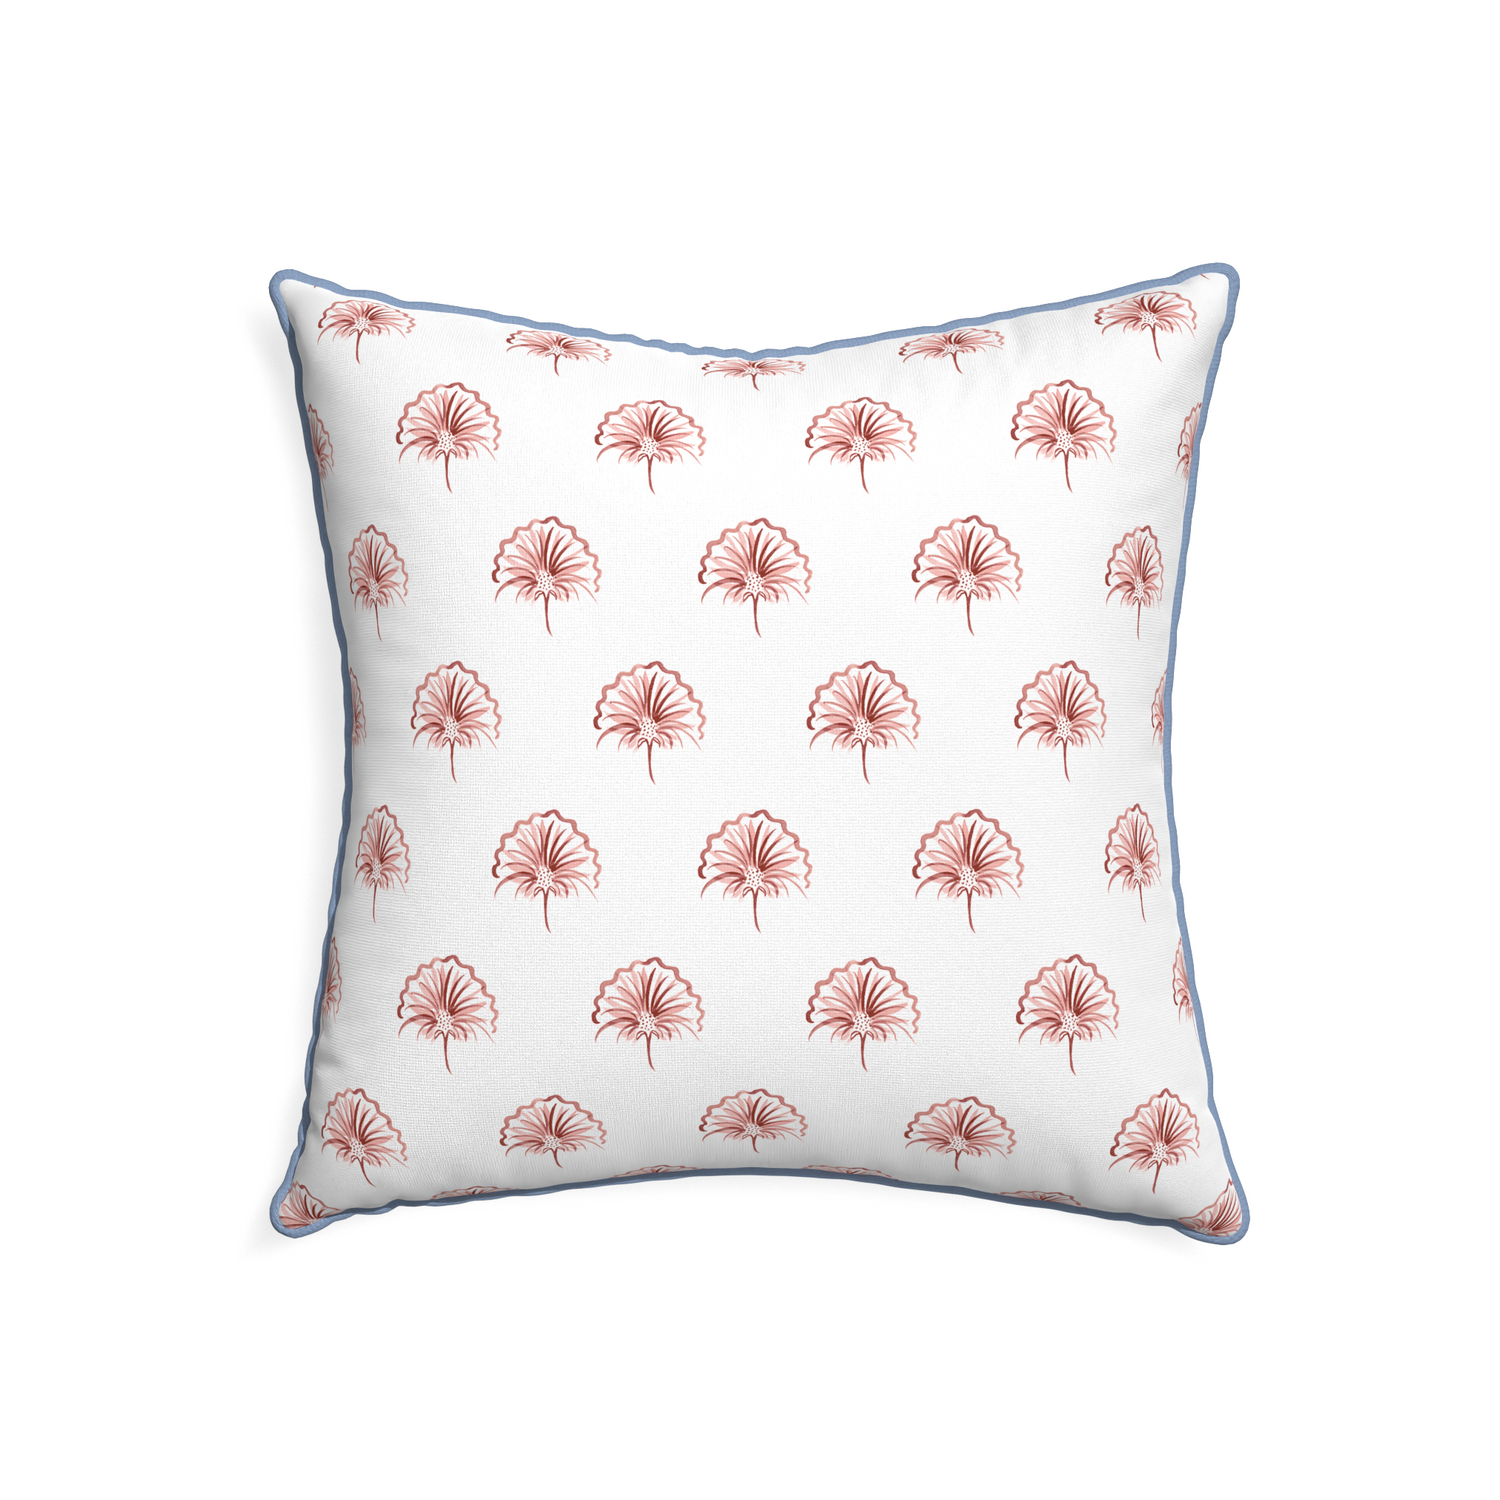 22-square penelope rose custom pillow with sky piping on white background